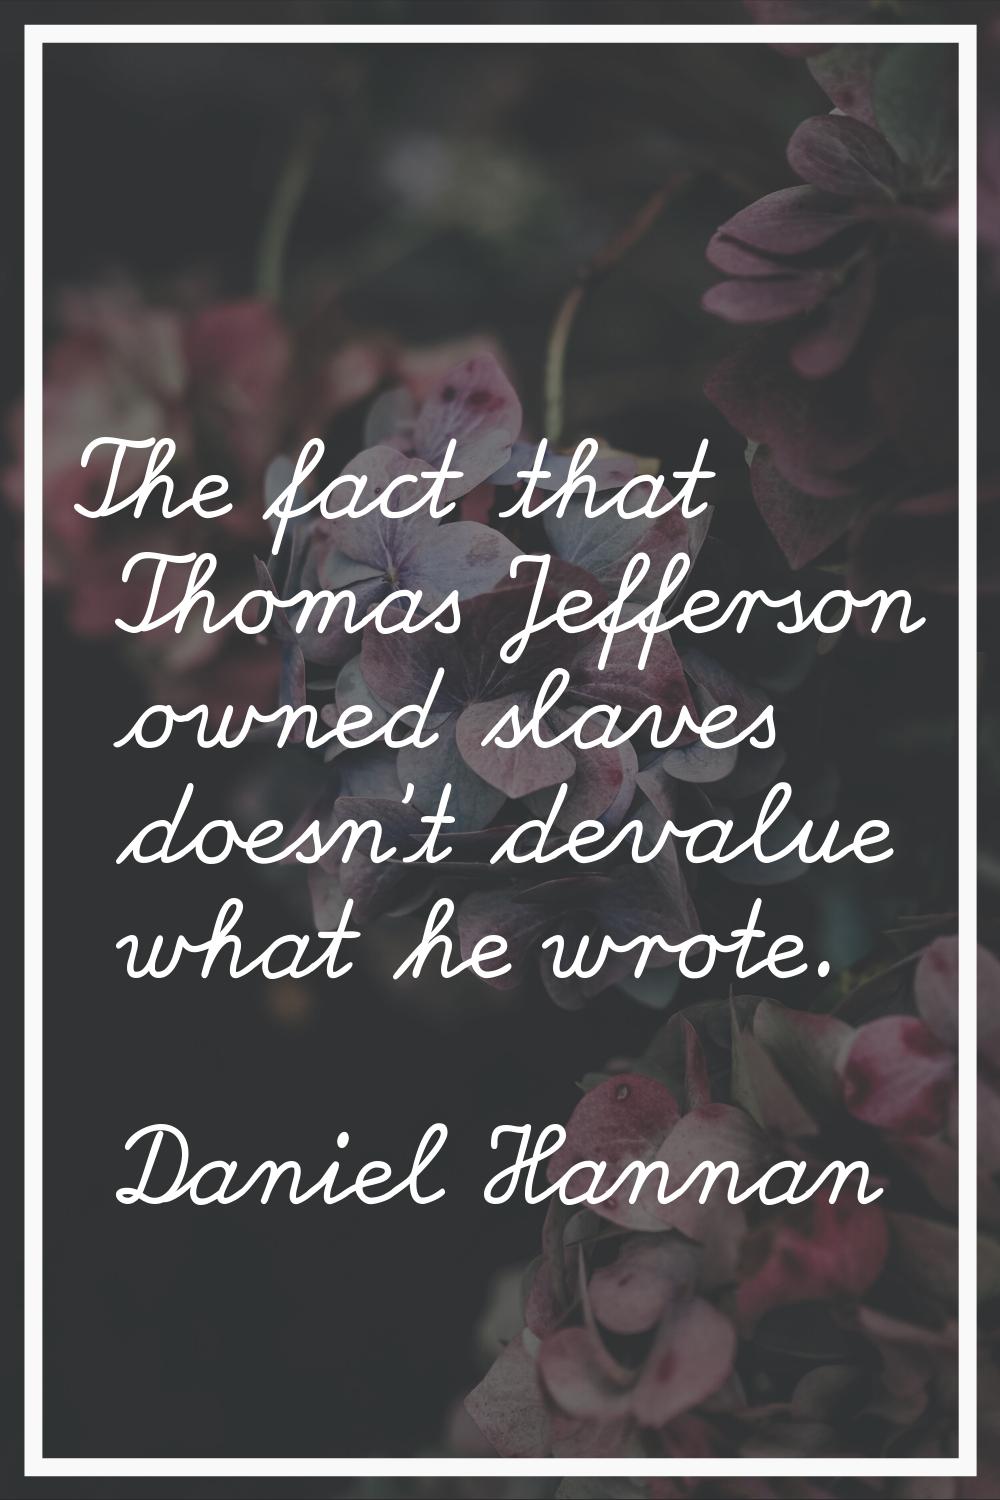 The fact that Thomas Jefferson owned slaves doesn't devalue what he wrote.